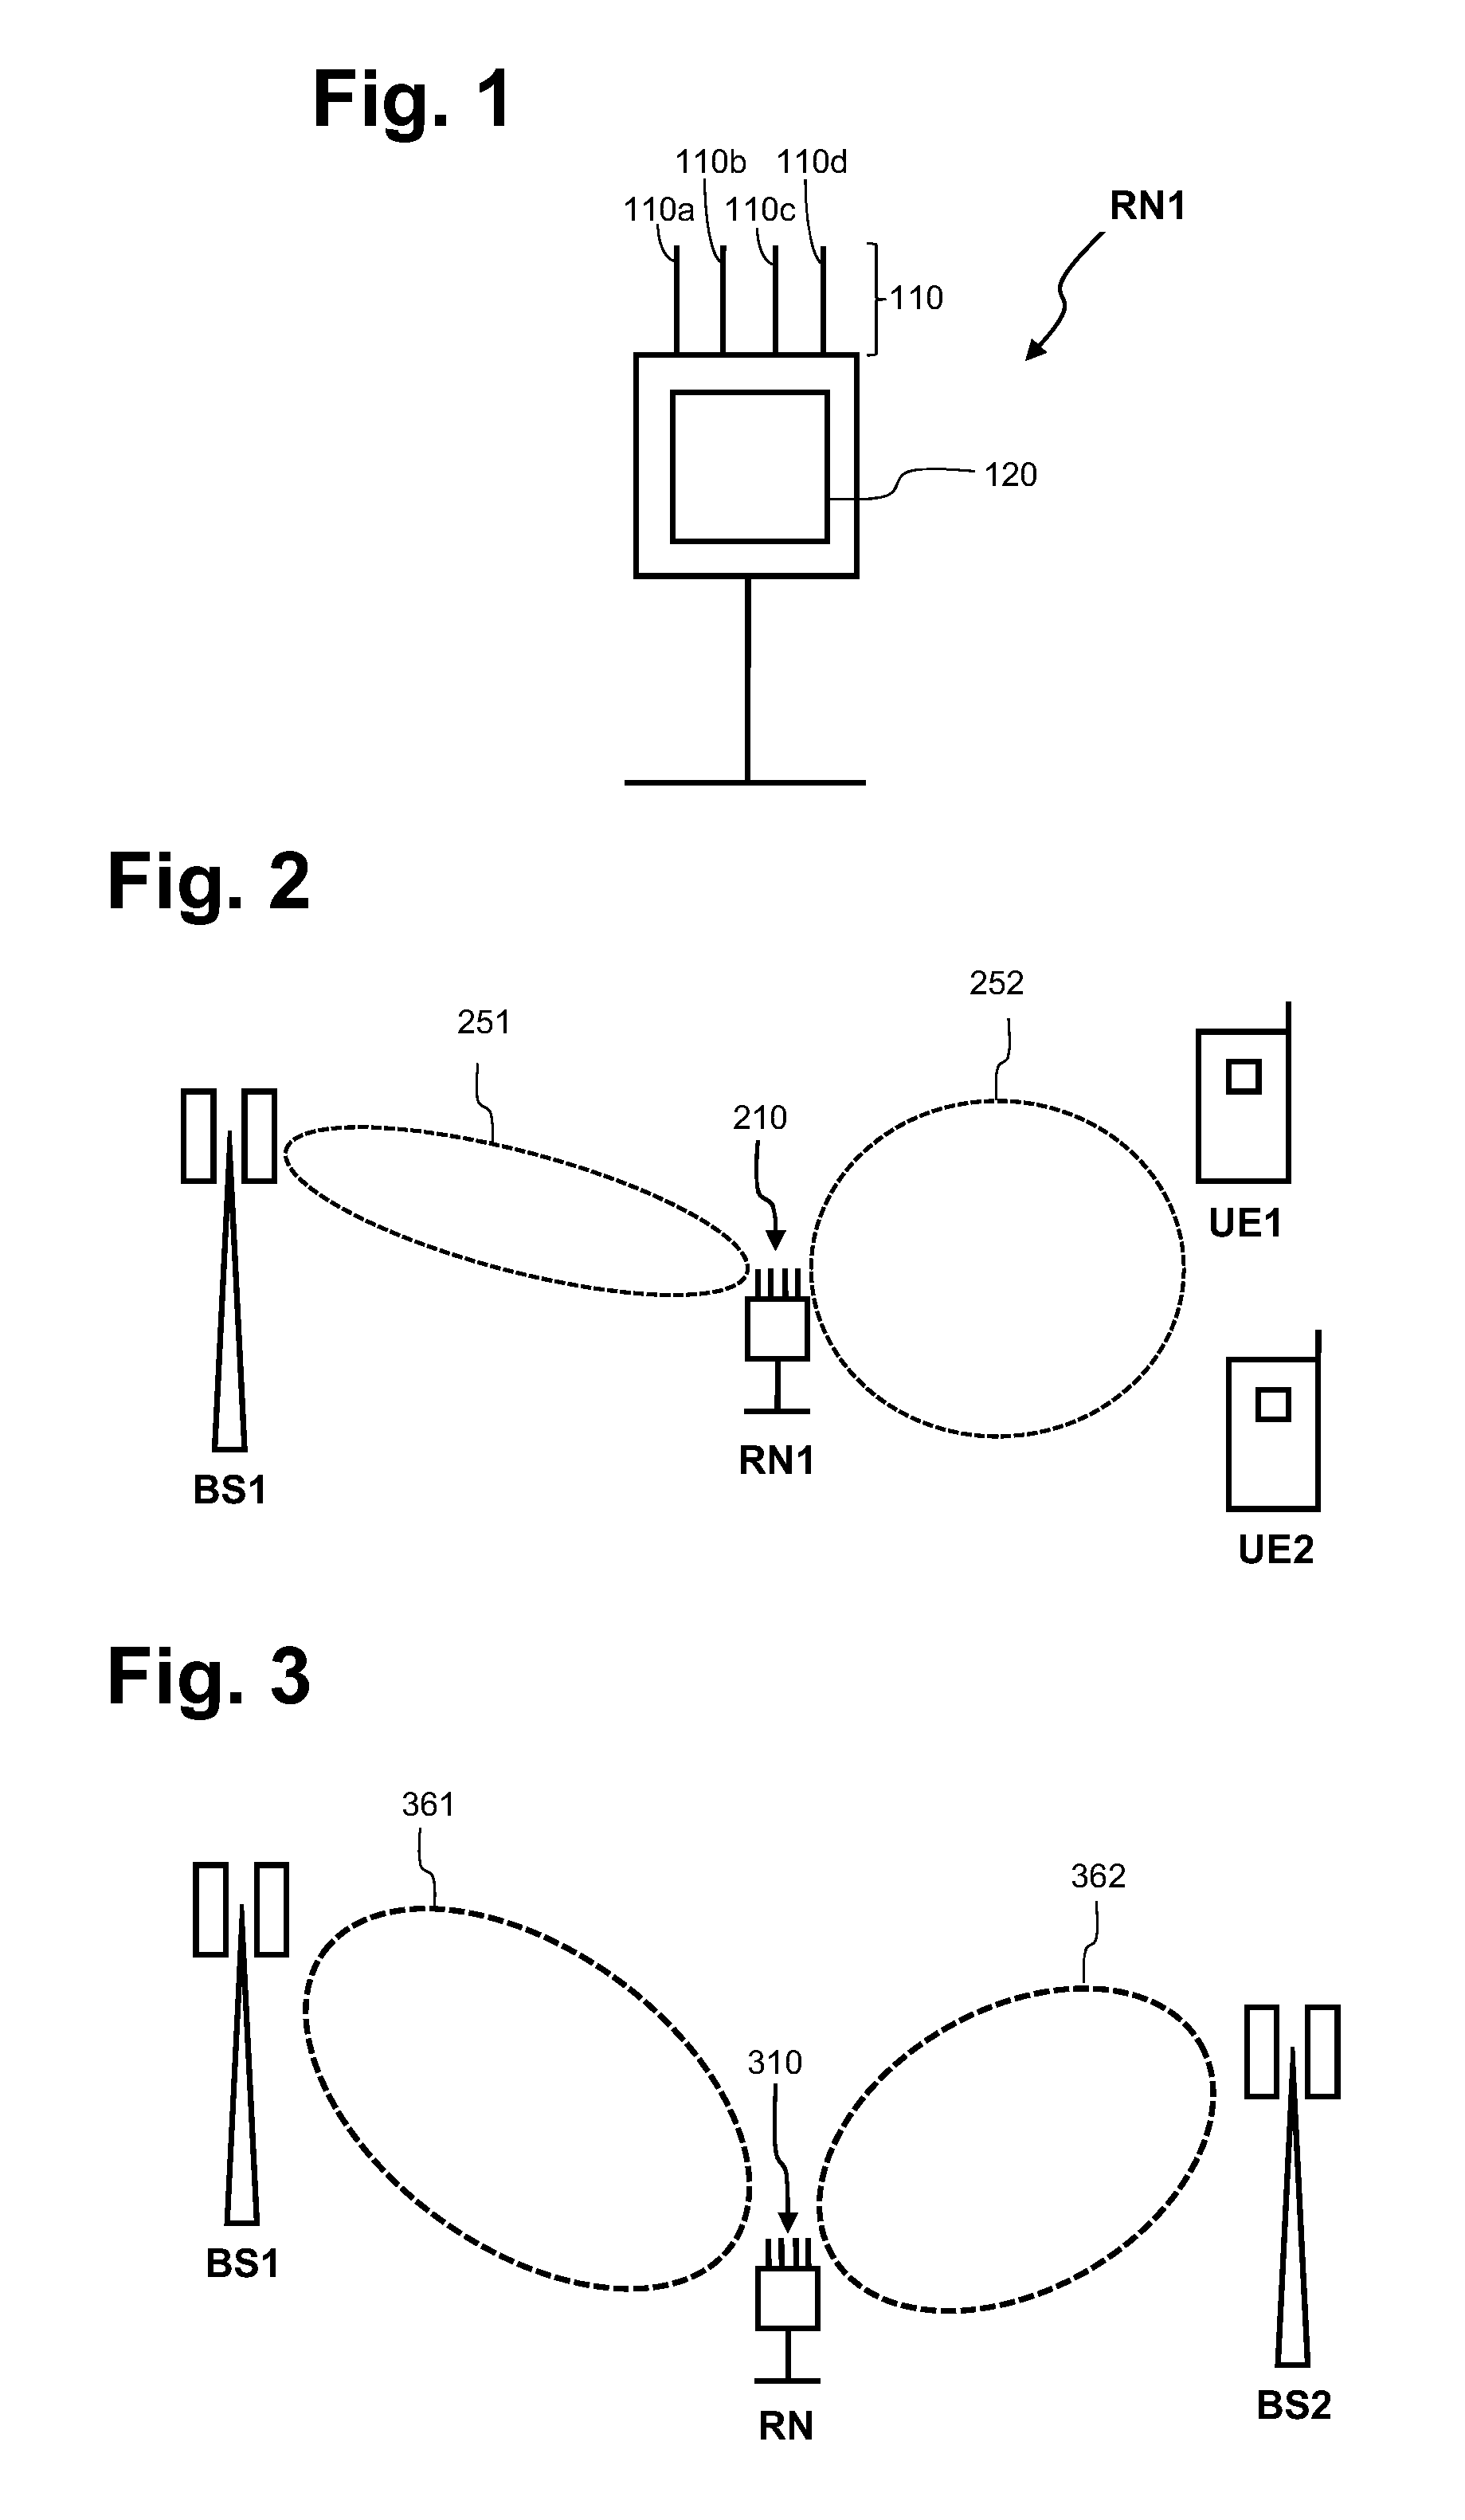 Relay node operable with different spatial characteristic antenna patterns